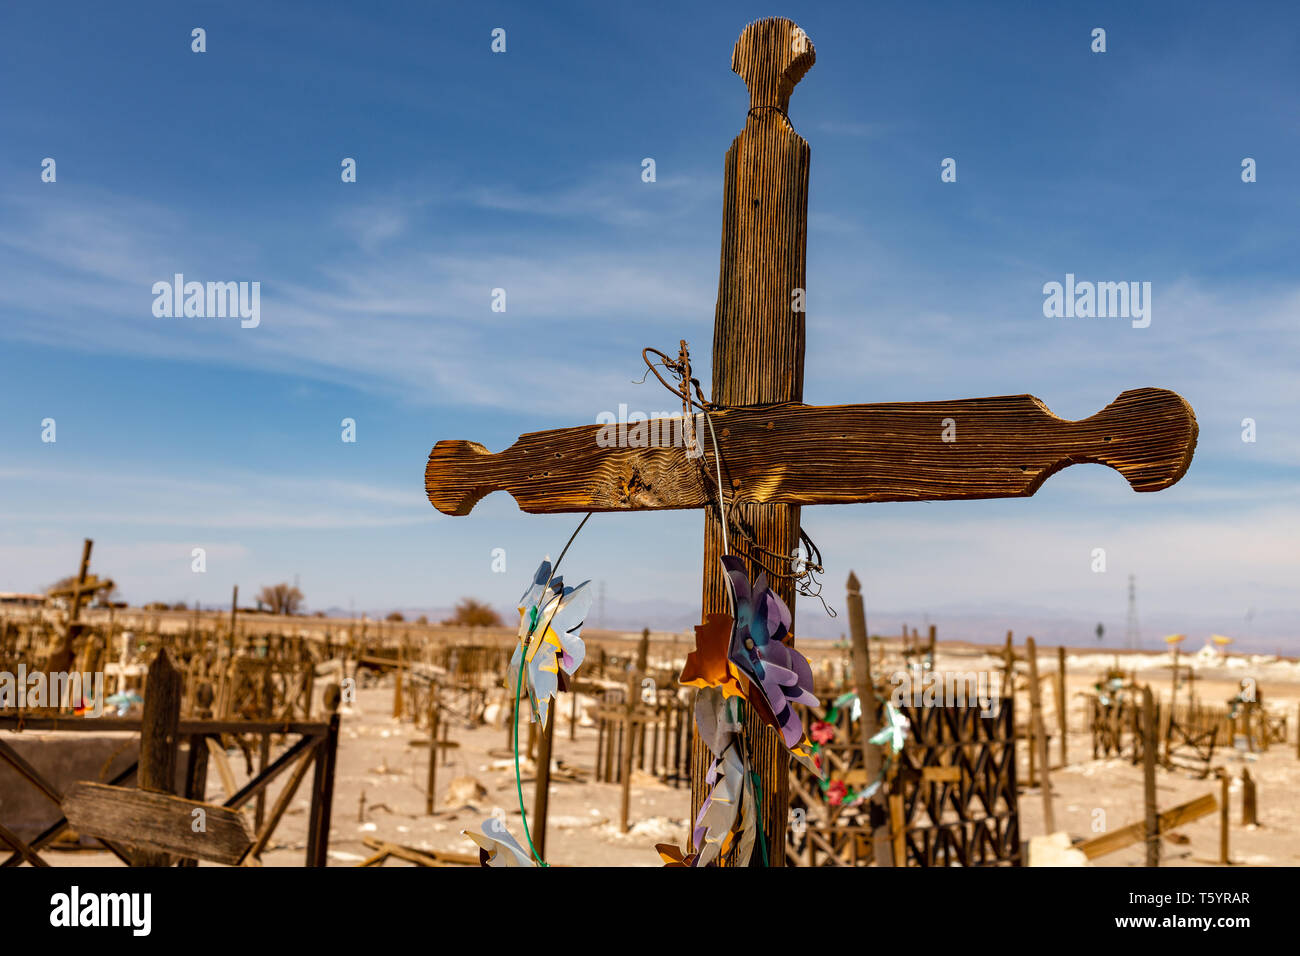 Abandoned Cemetery in the Atacama Desert, Northern Chile. From the era of nitrate mining Stock Photo